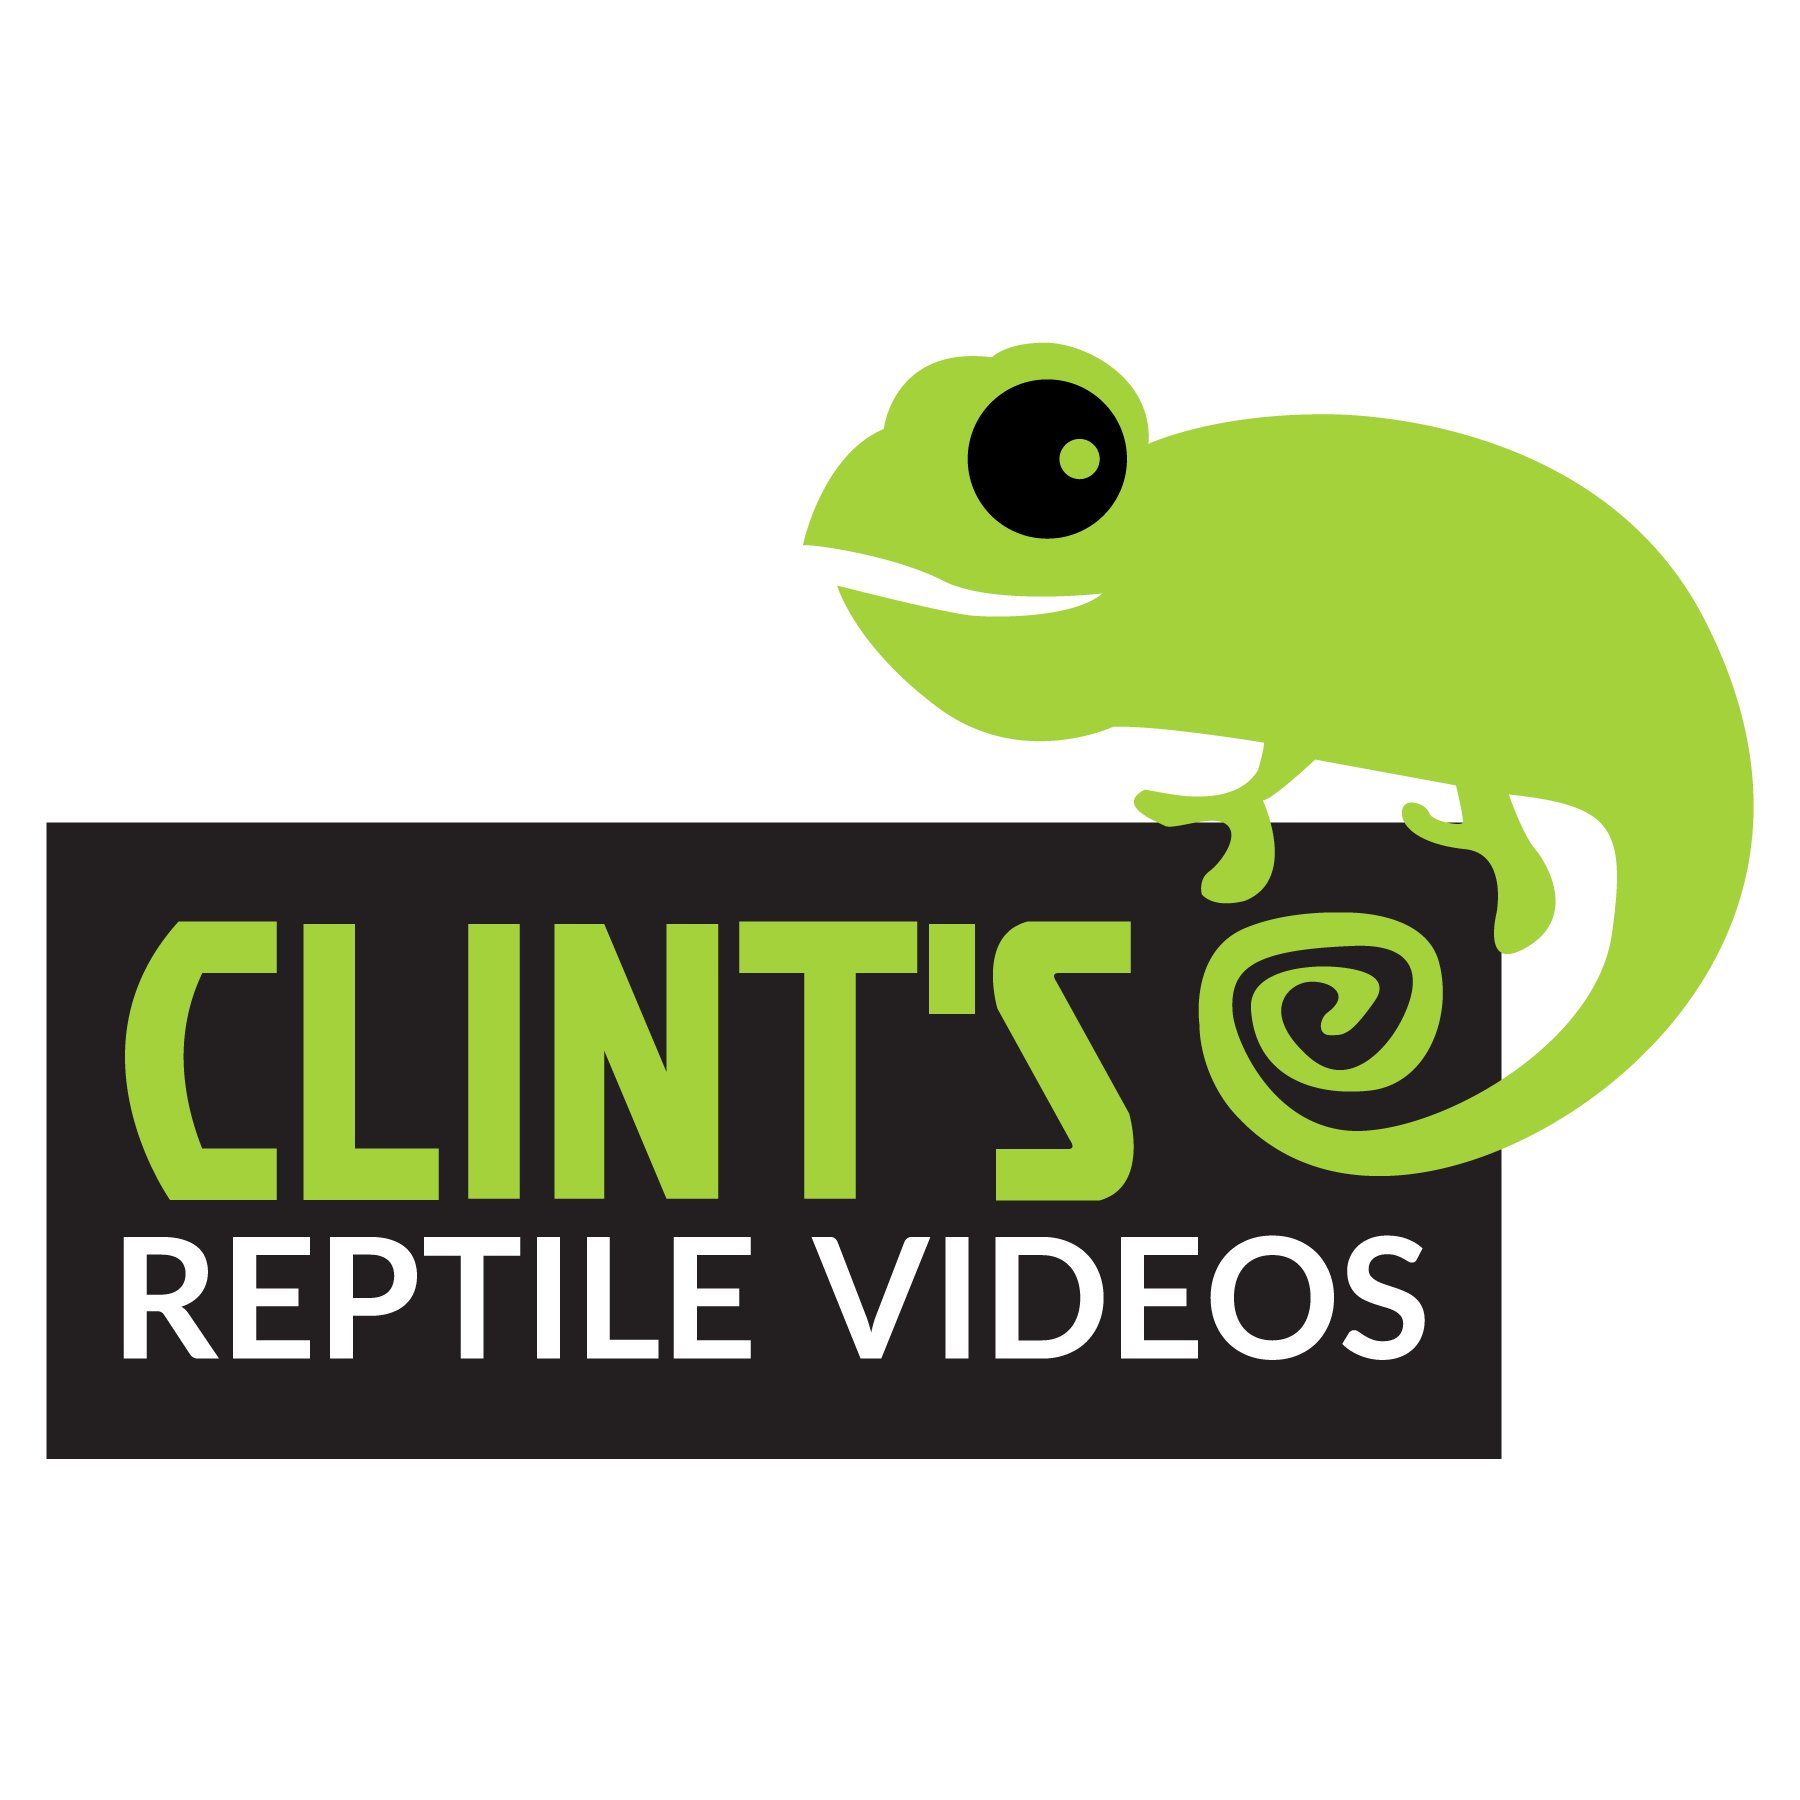 Clint is a professional biologist & educator, but above all, Clint LOVES reptiles and he loves to share that love w/ everyone he meets. Get excited w/ Clint!